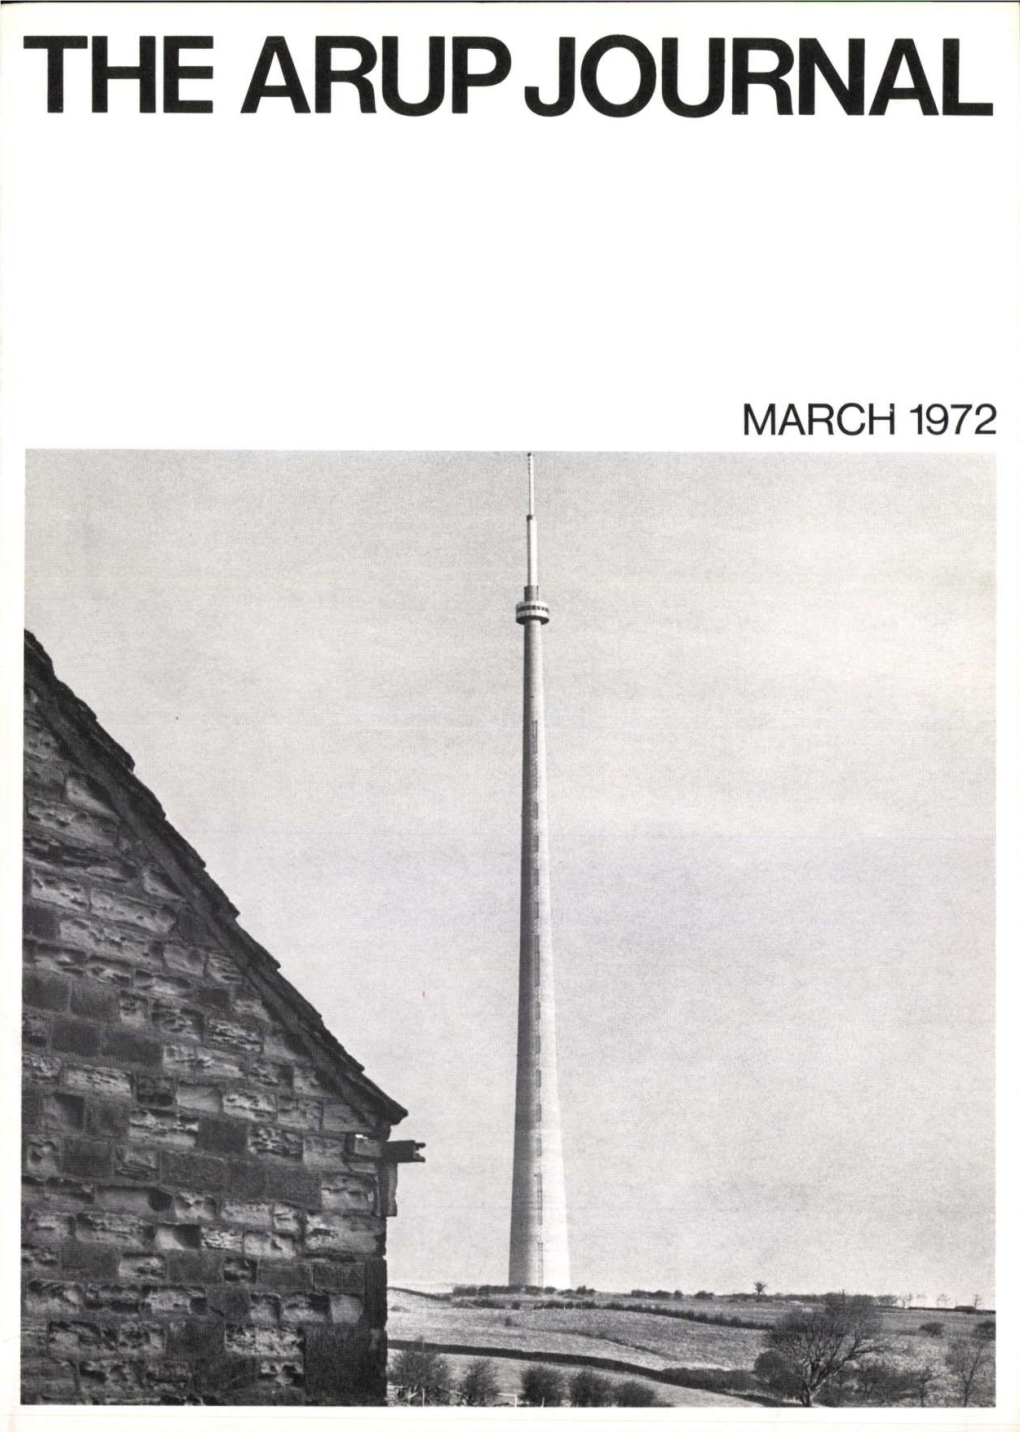 The Emley Moor Television Tower, by A